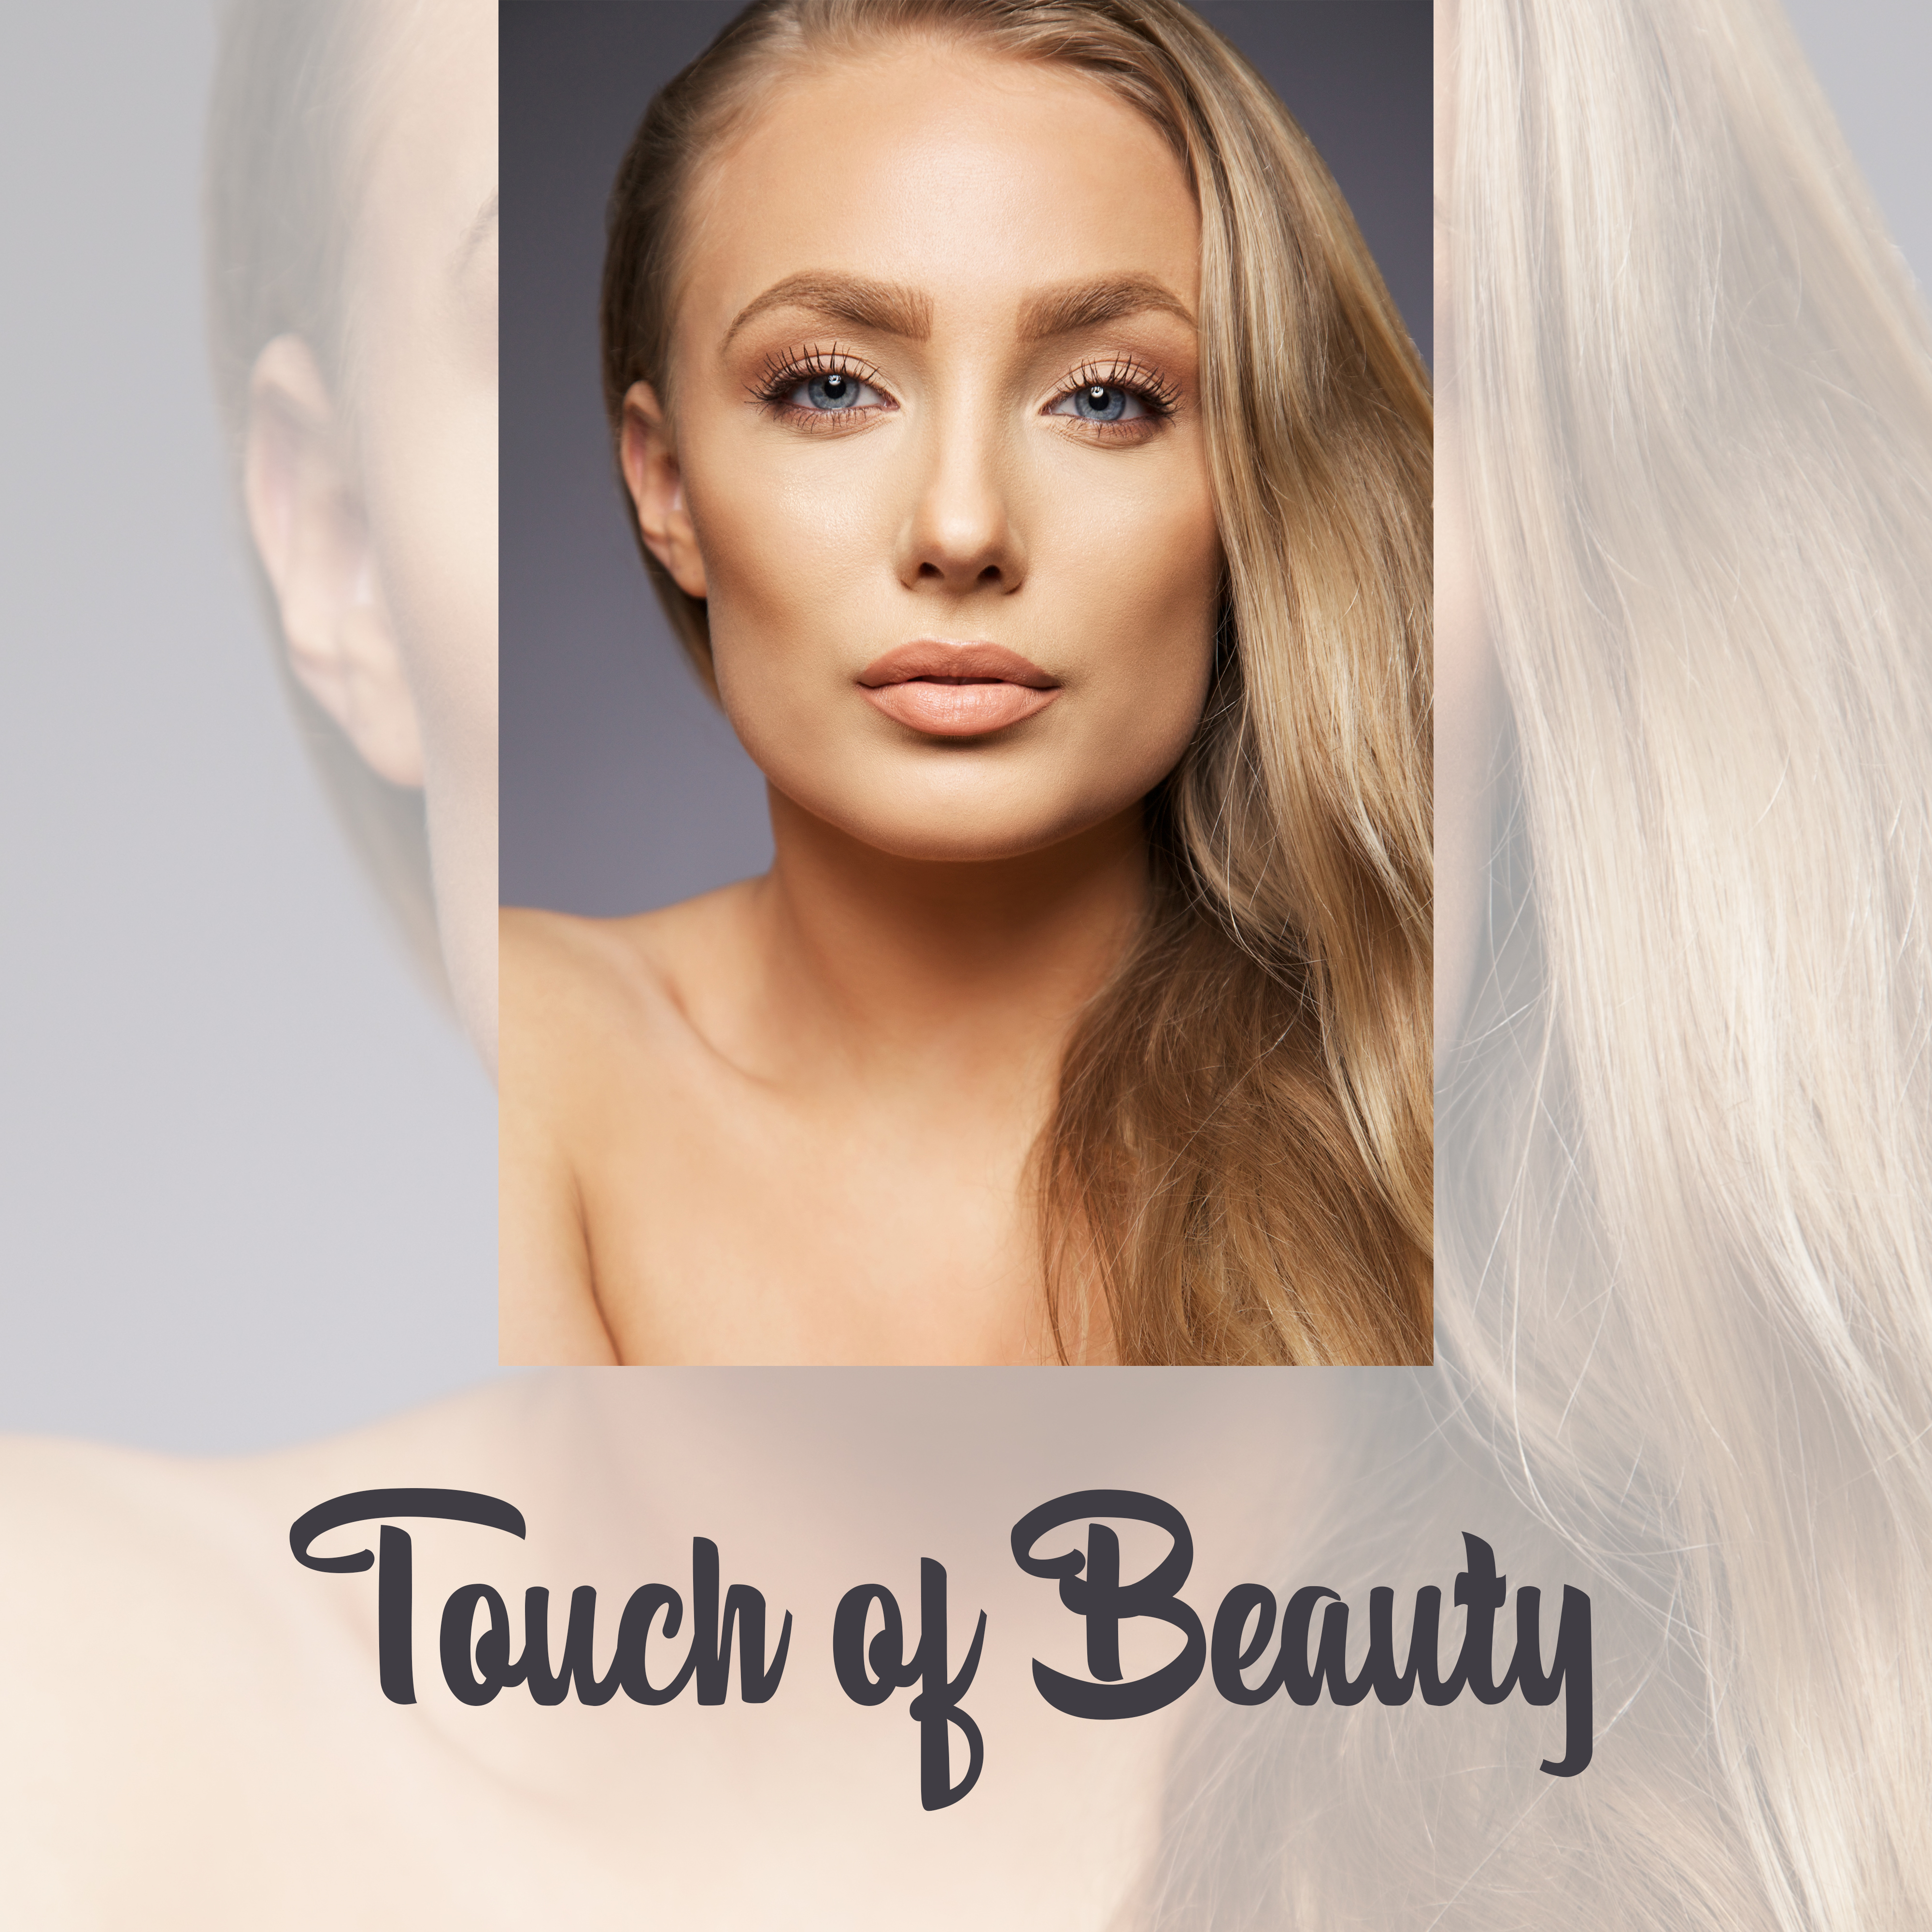 Touch of Beauty – Relaxing Music for Spa, Deep Massage, Healing Body, Divine Spa, Pure Rest, Oriental Music, Soothing Nature Sounds for Wellness